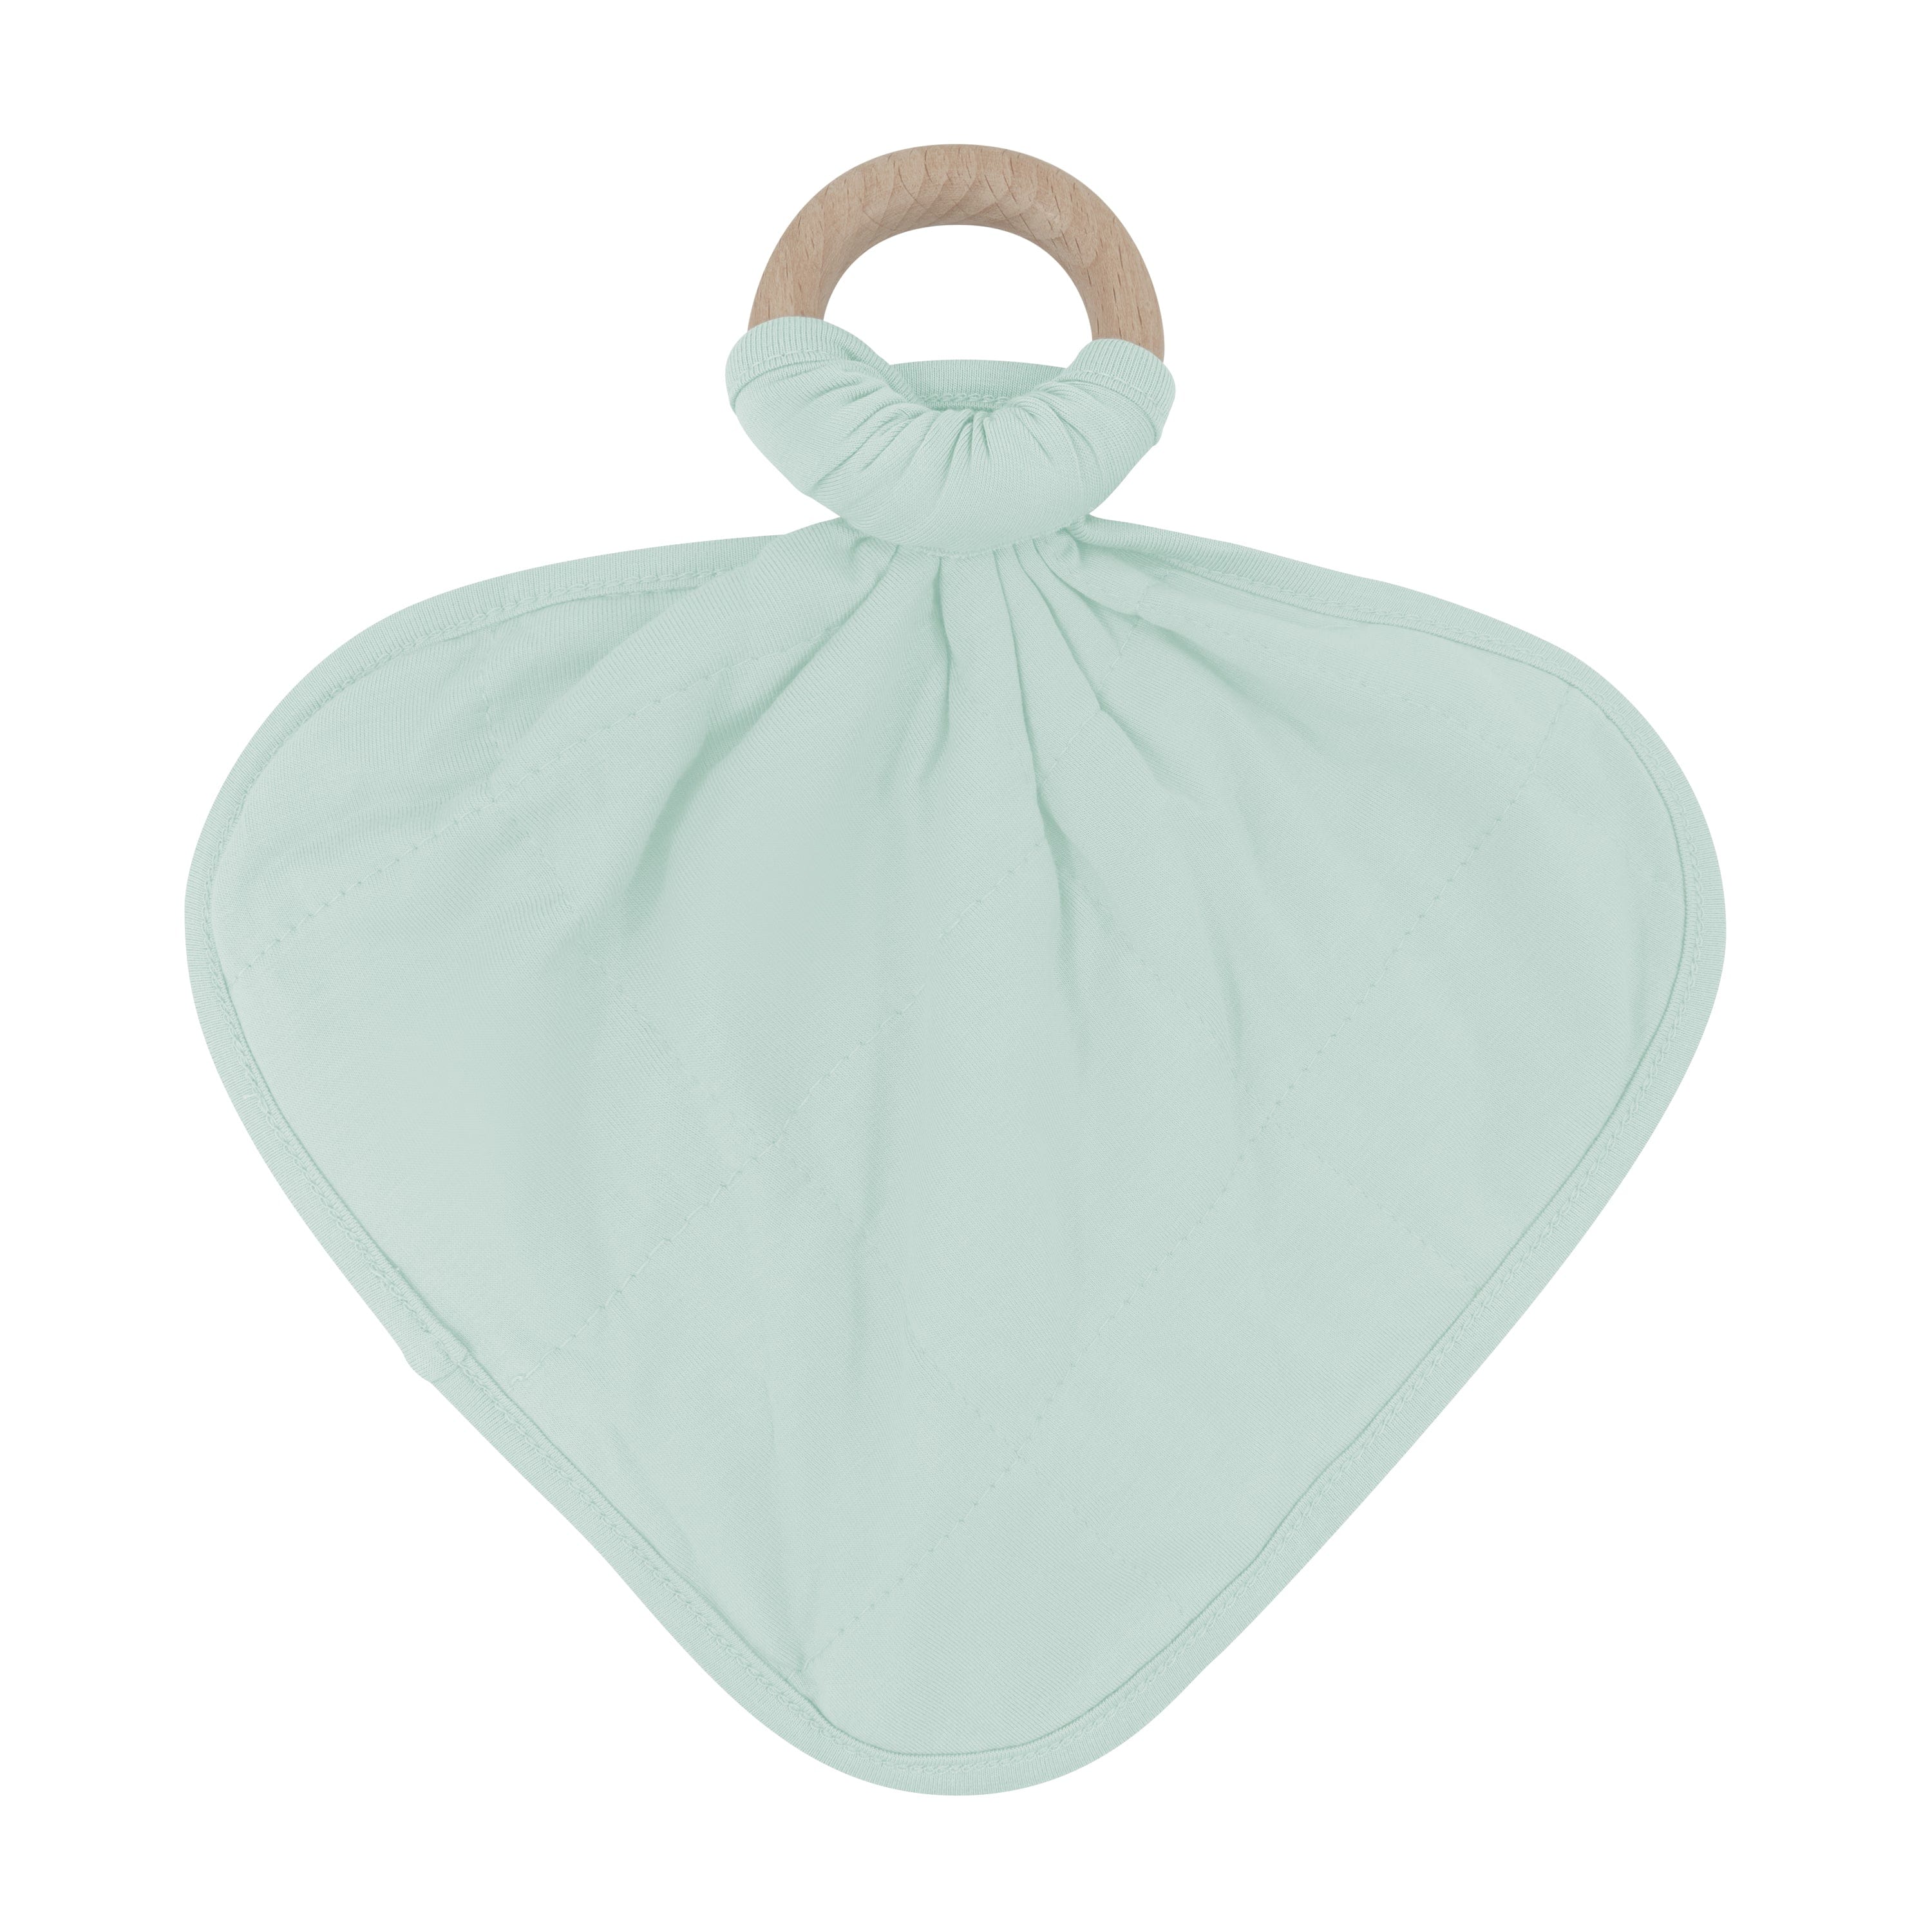 Kyte Baby Lovey Sage / Infant Lovey in Sage with Removable Wooden Teething Ring